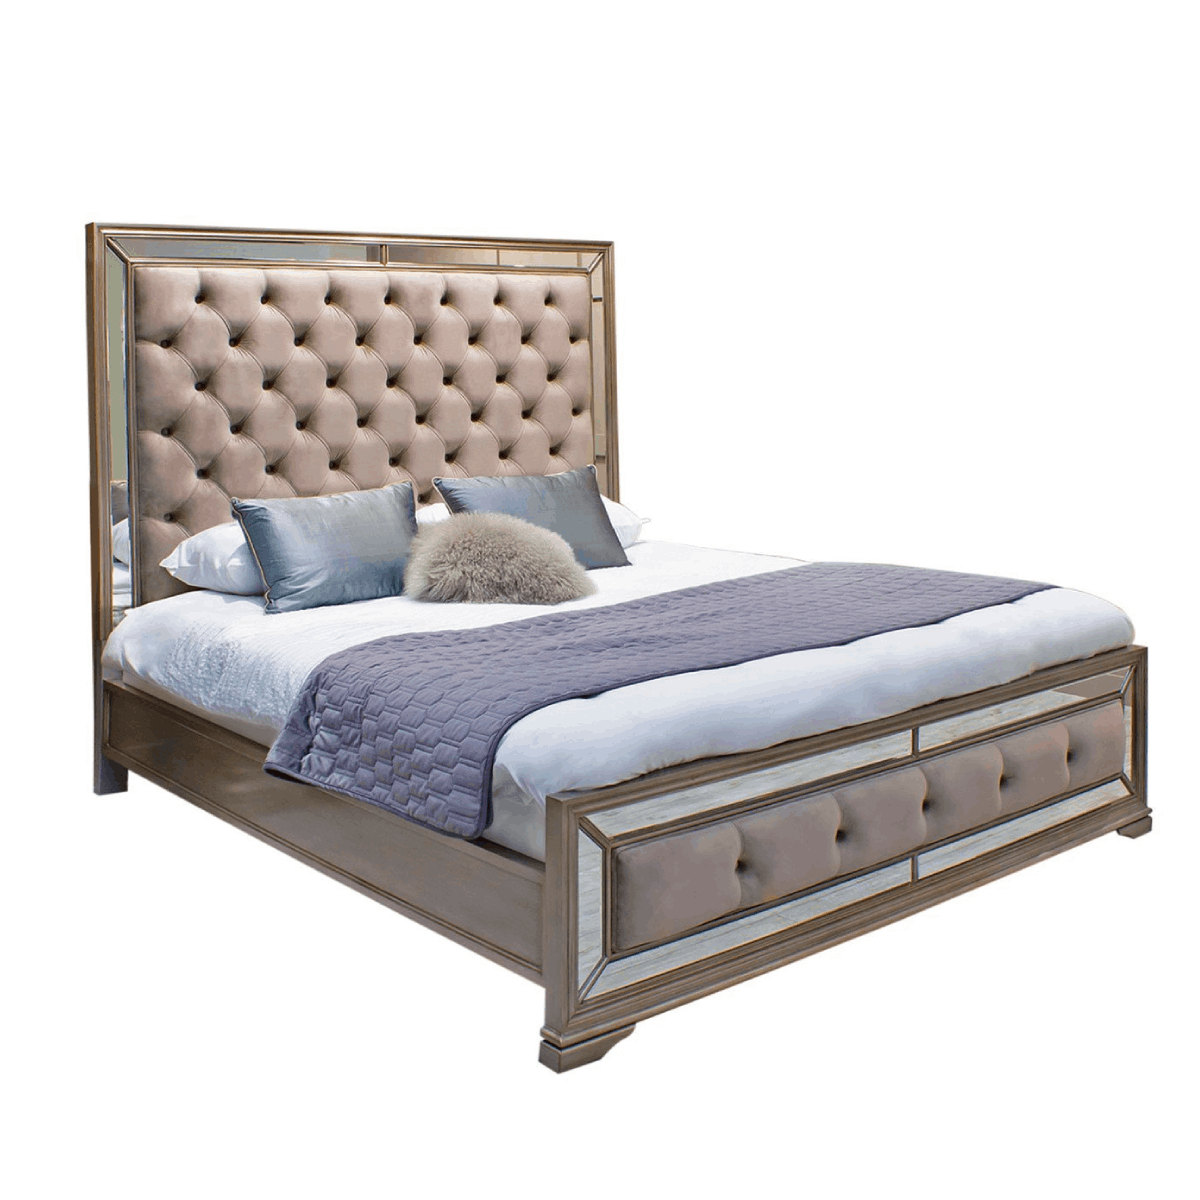 Jessica 5ft King Mirrored Bed Frame from Upstairs Downstairs Furniture in Lisburn, Monaghan and Enniskillen